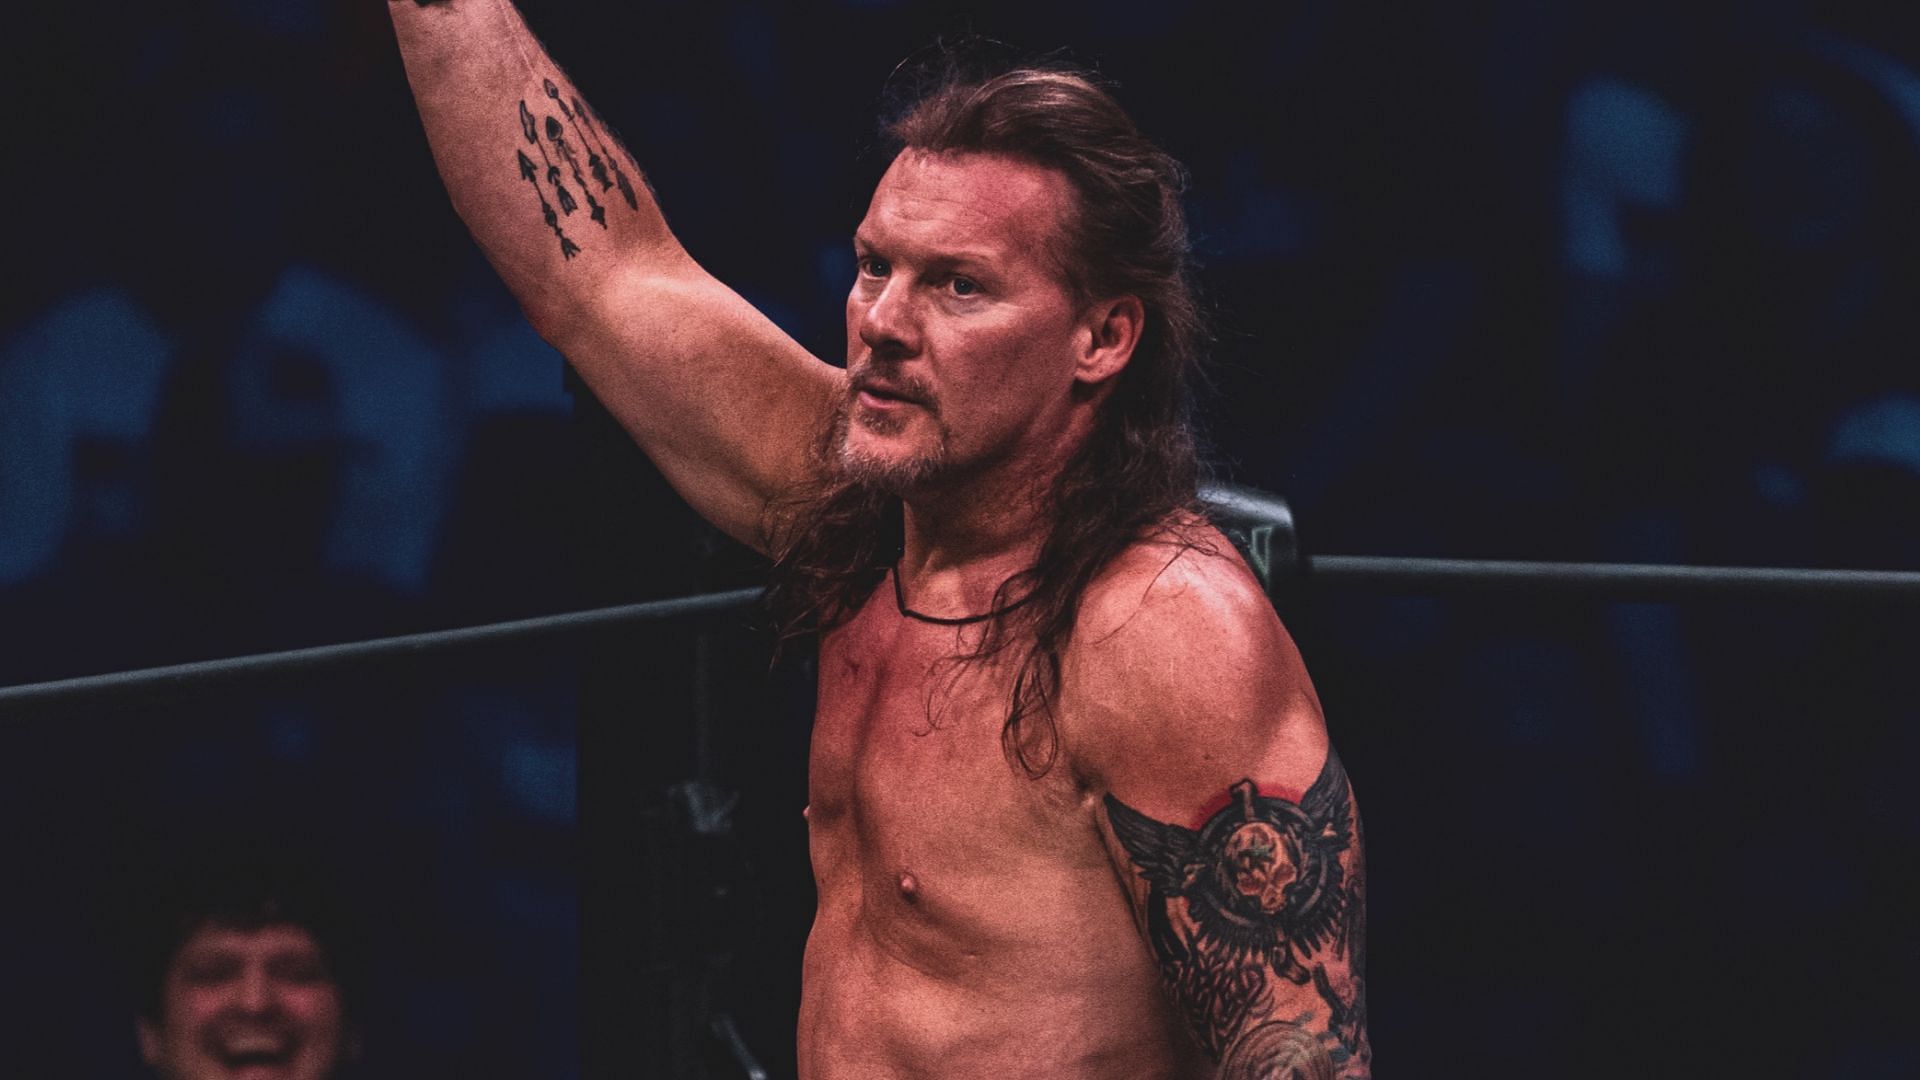 Chris Jericho at AEW Revolution 2022 (Credit: Jay Lee Photography)